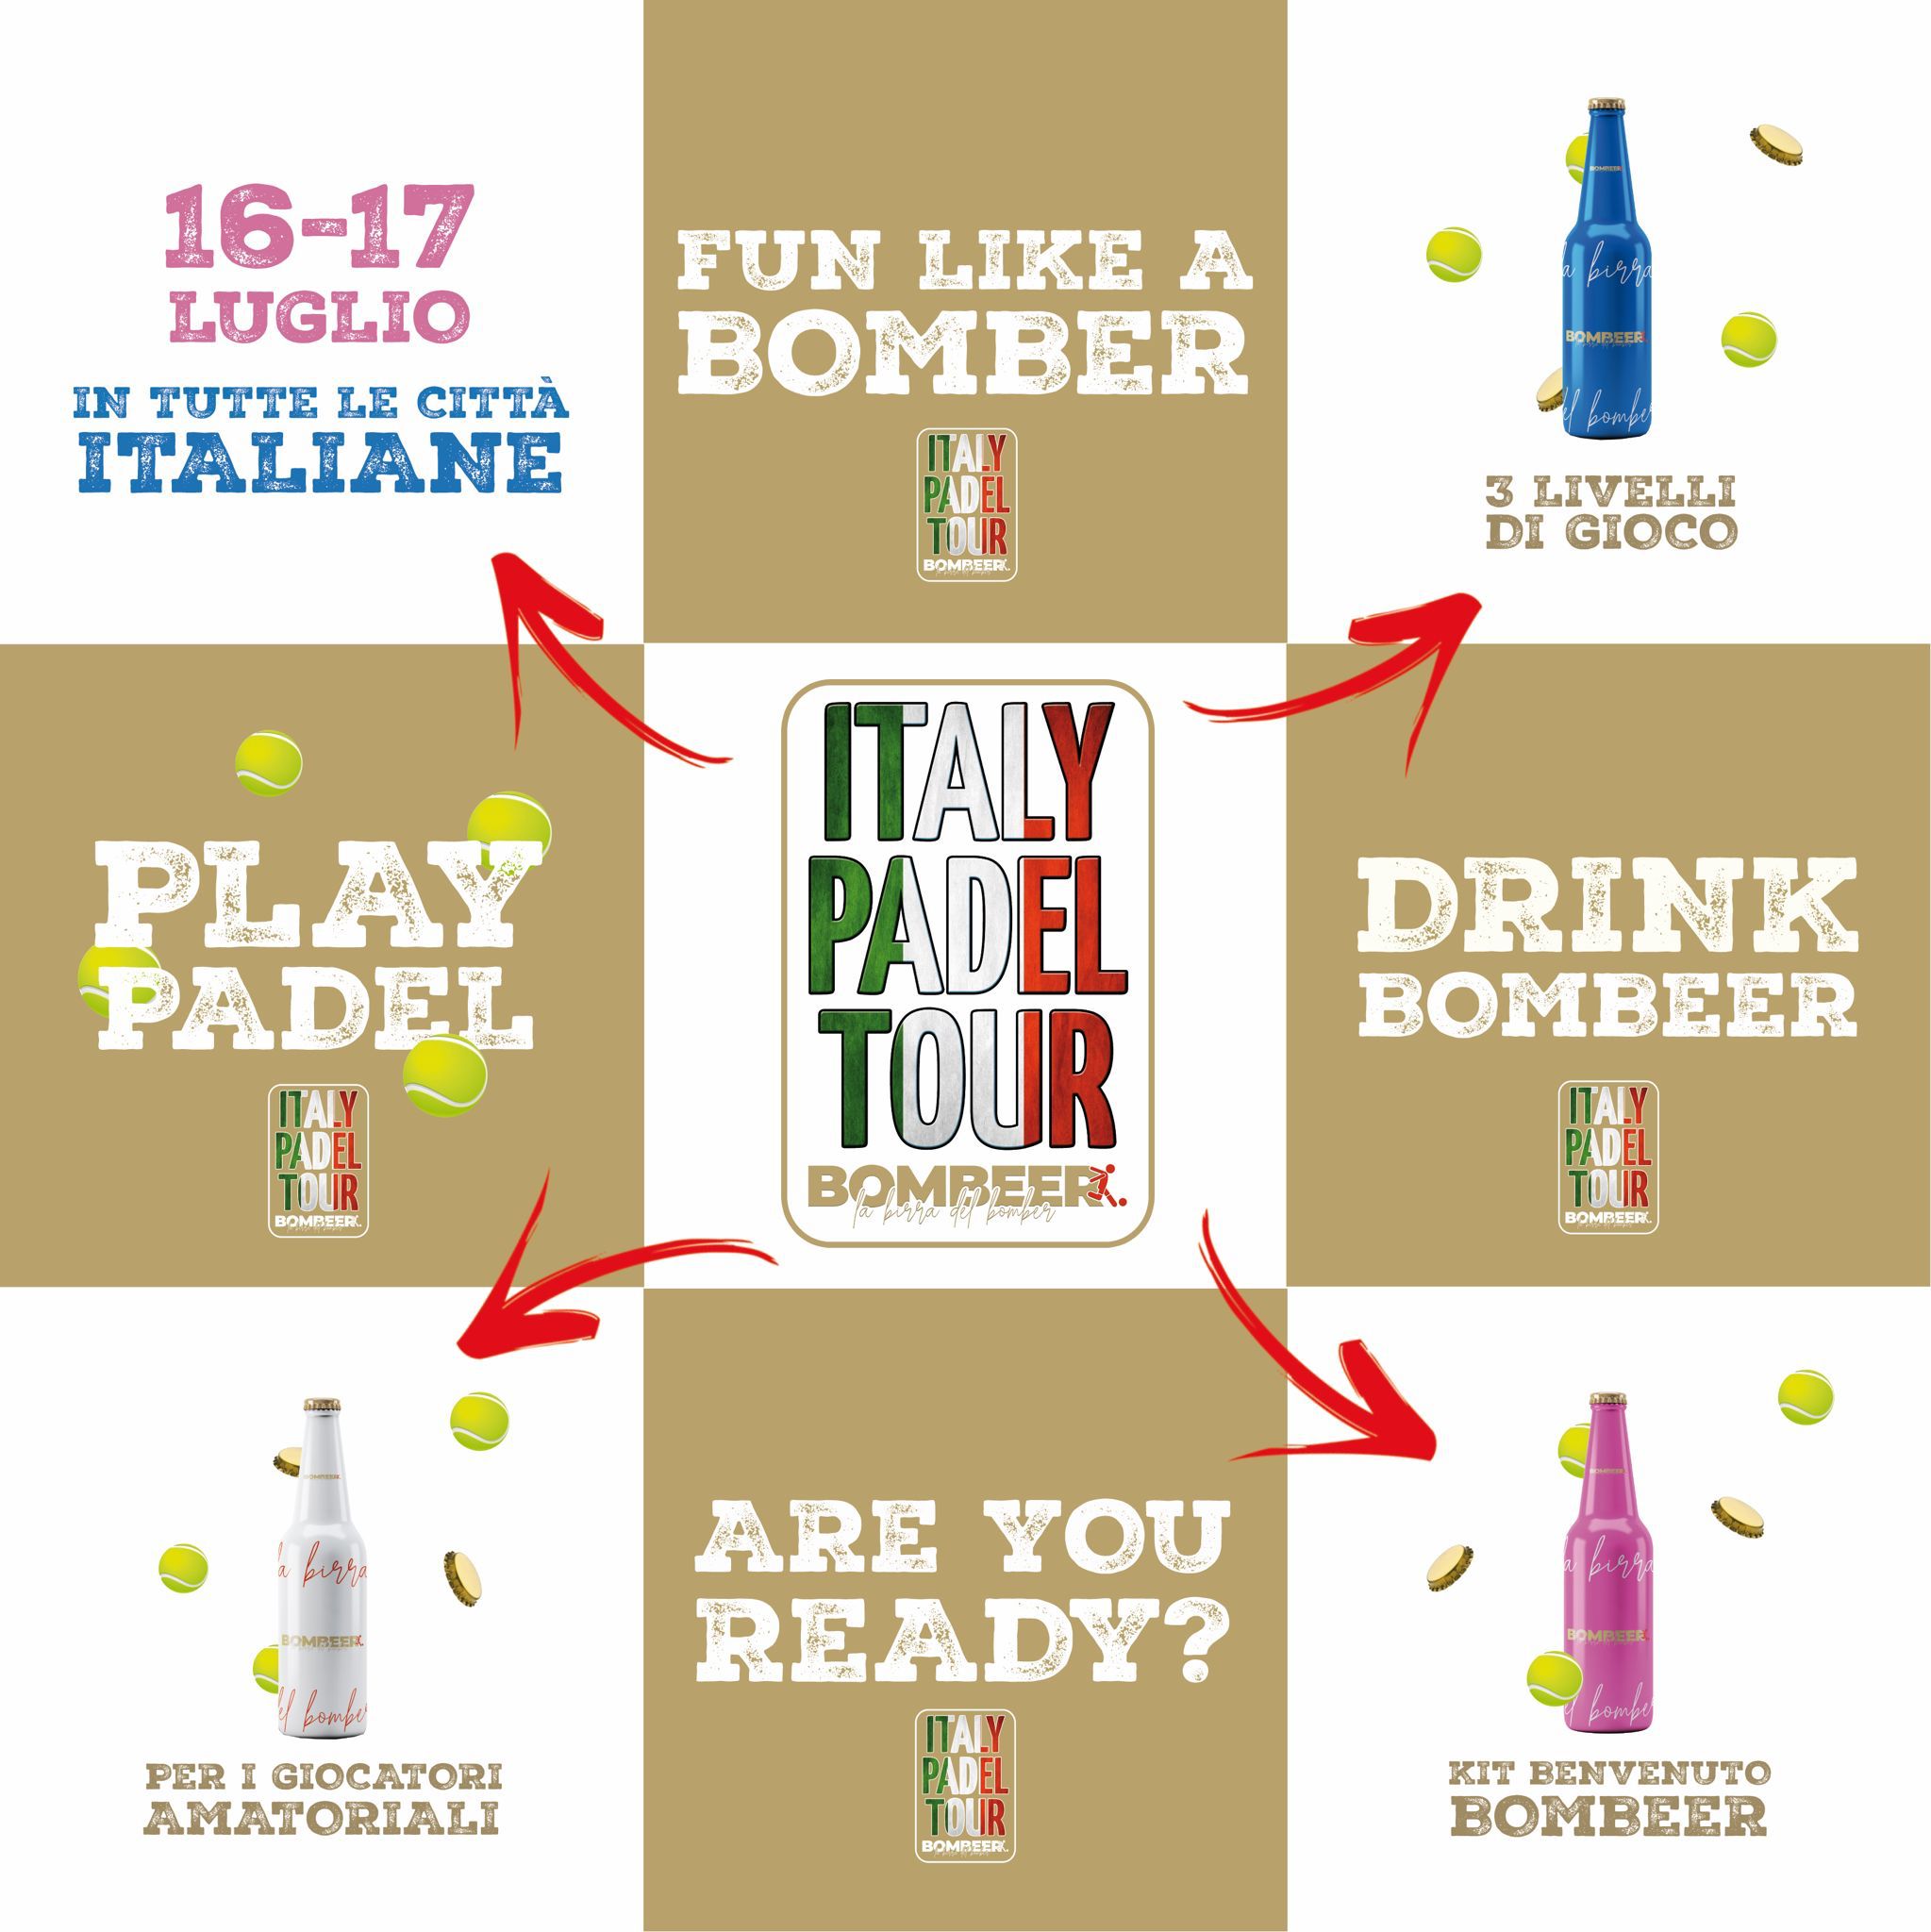 Bombeer Italy Padel Tour